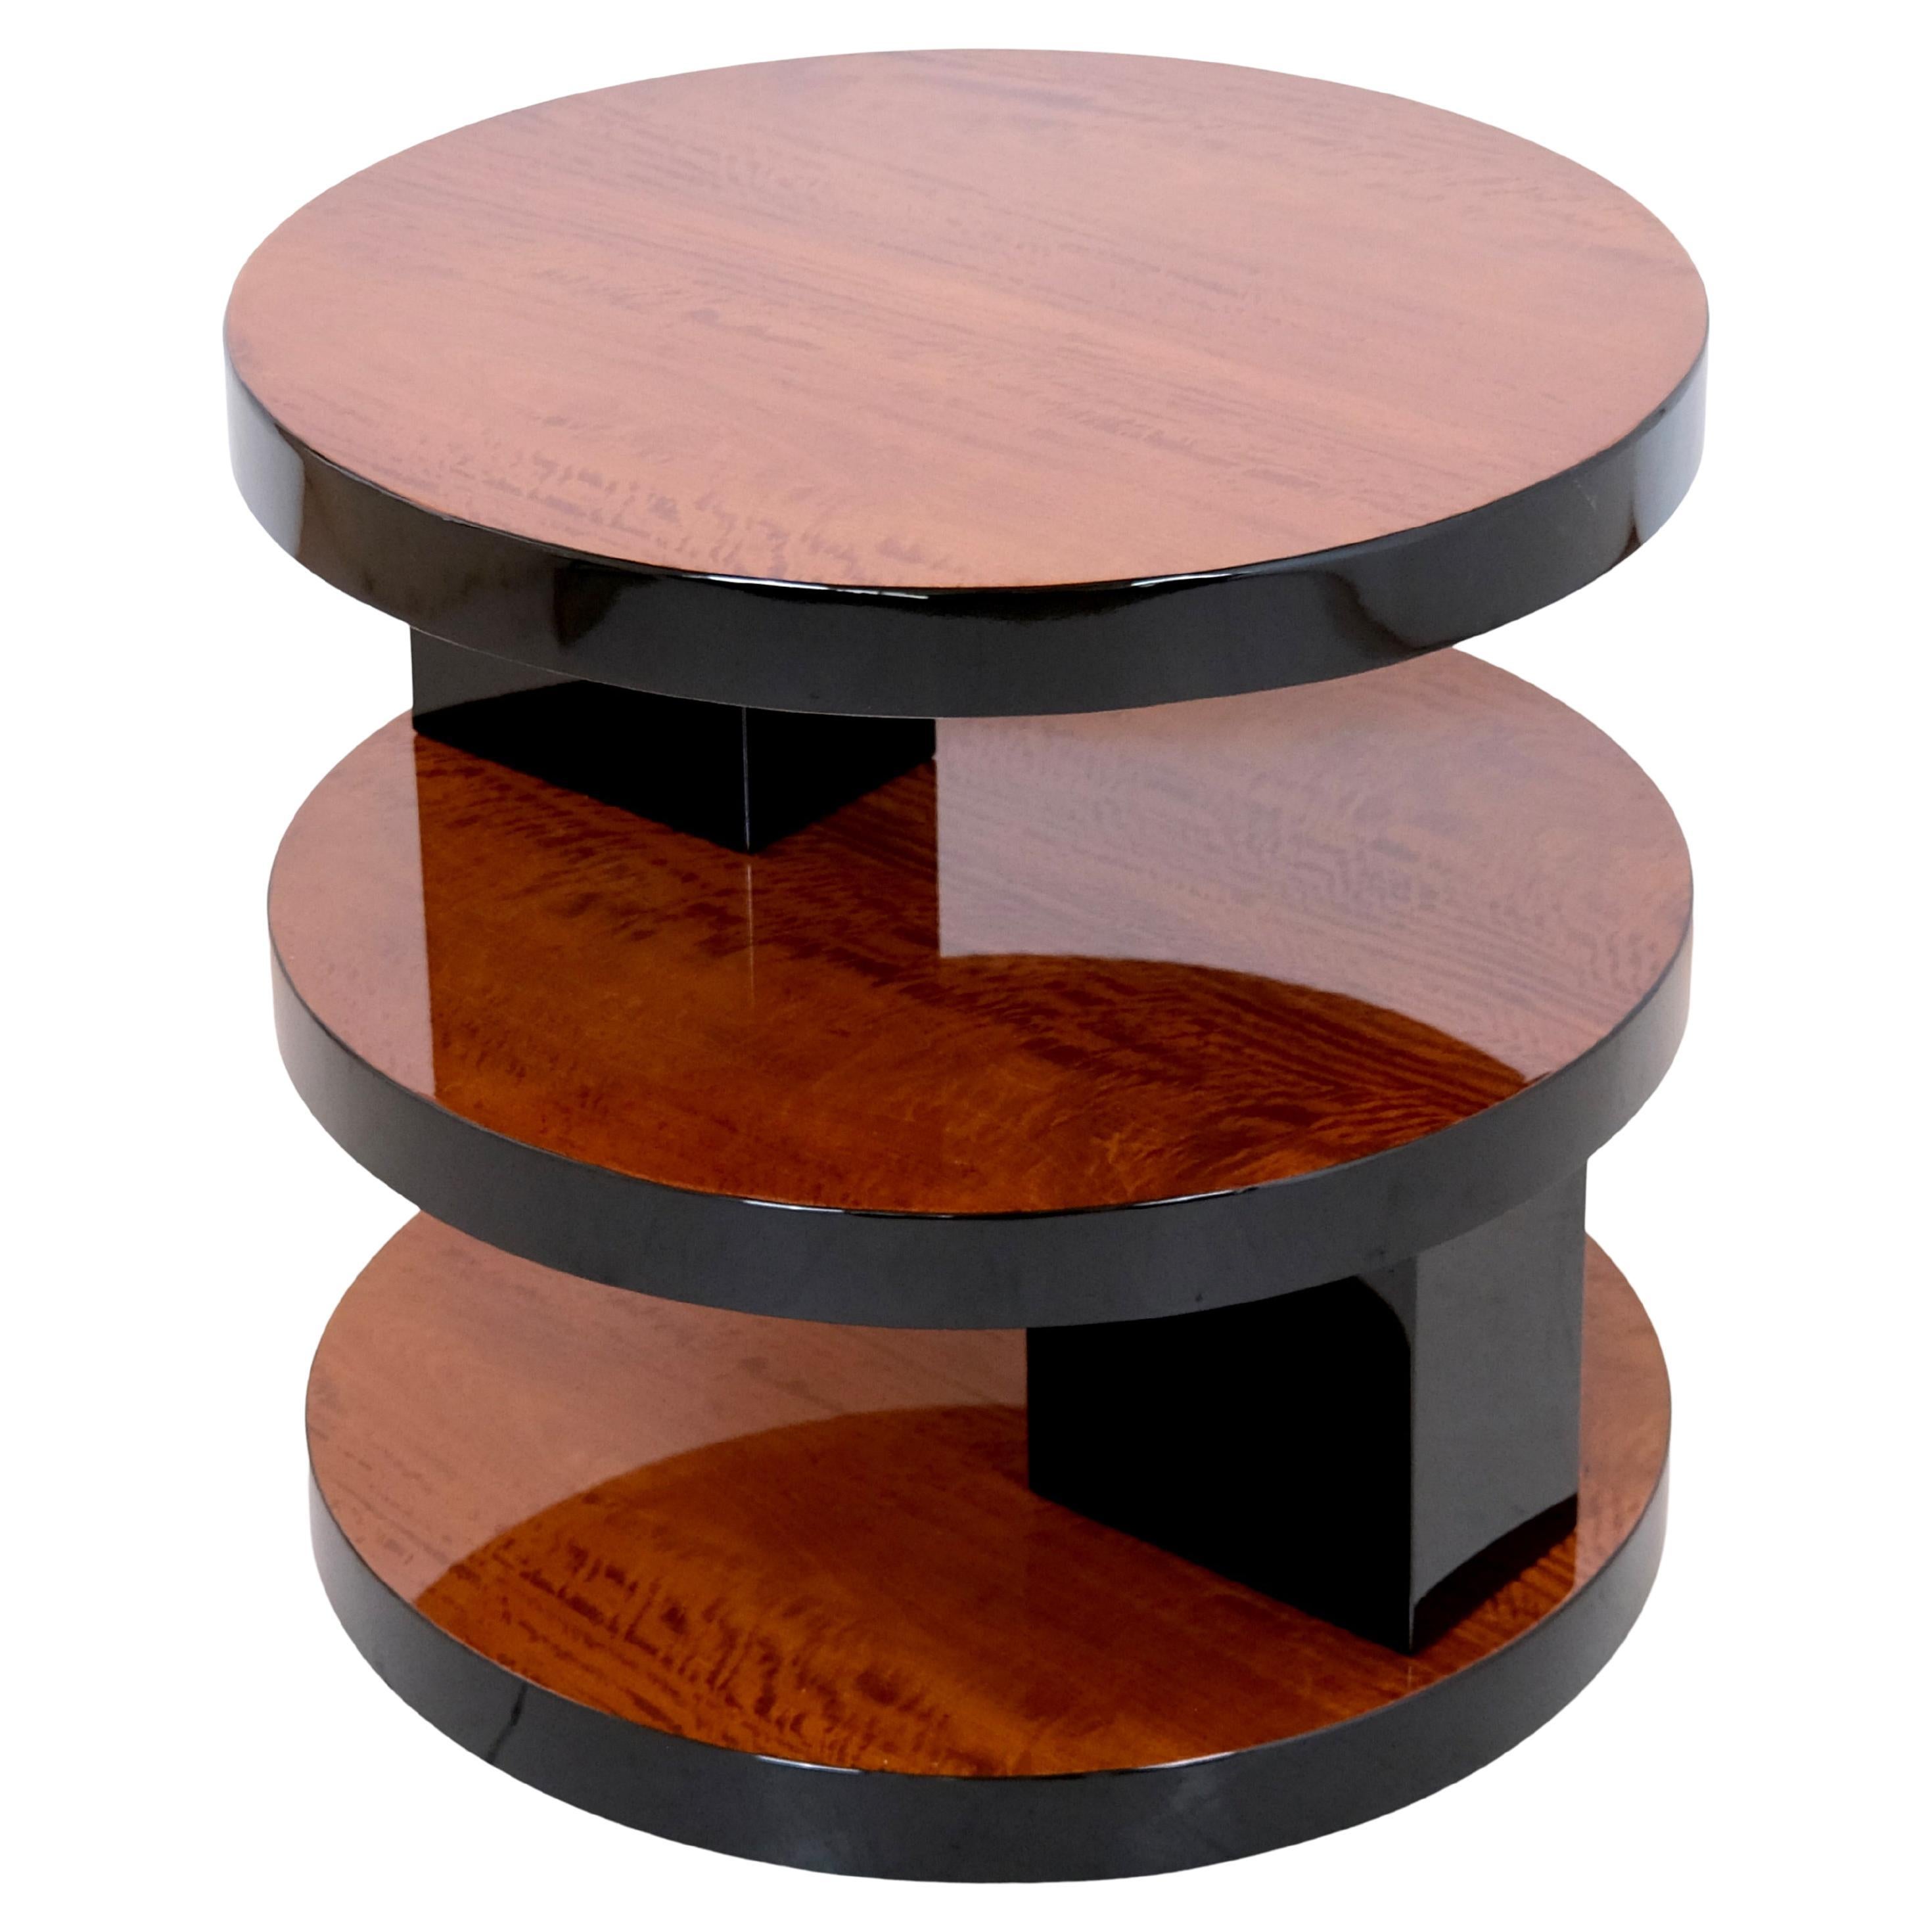 Round French Art Deco Mahogany Side Table with Black Lacquer with Three Levels